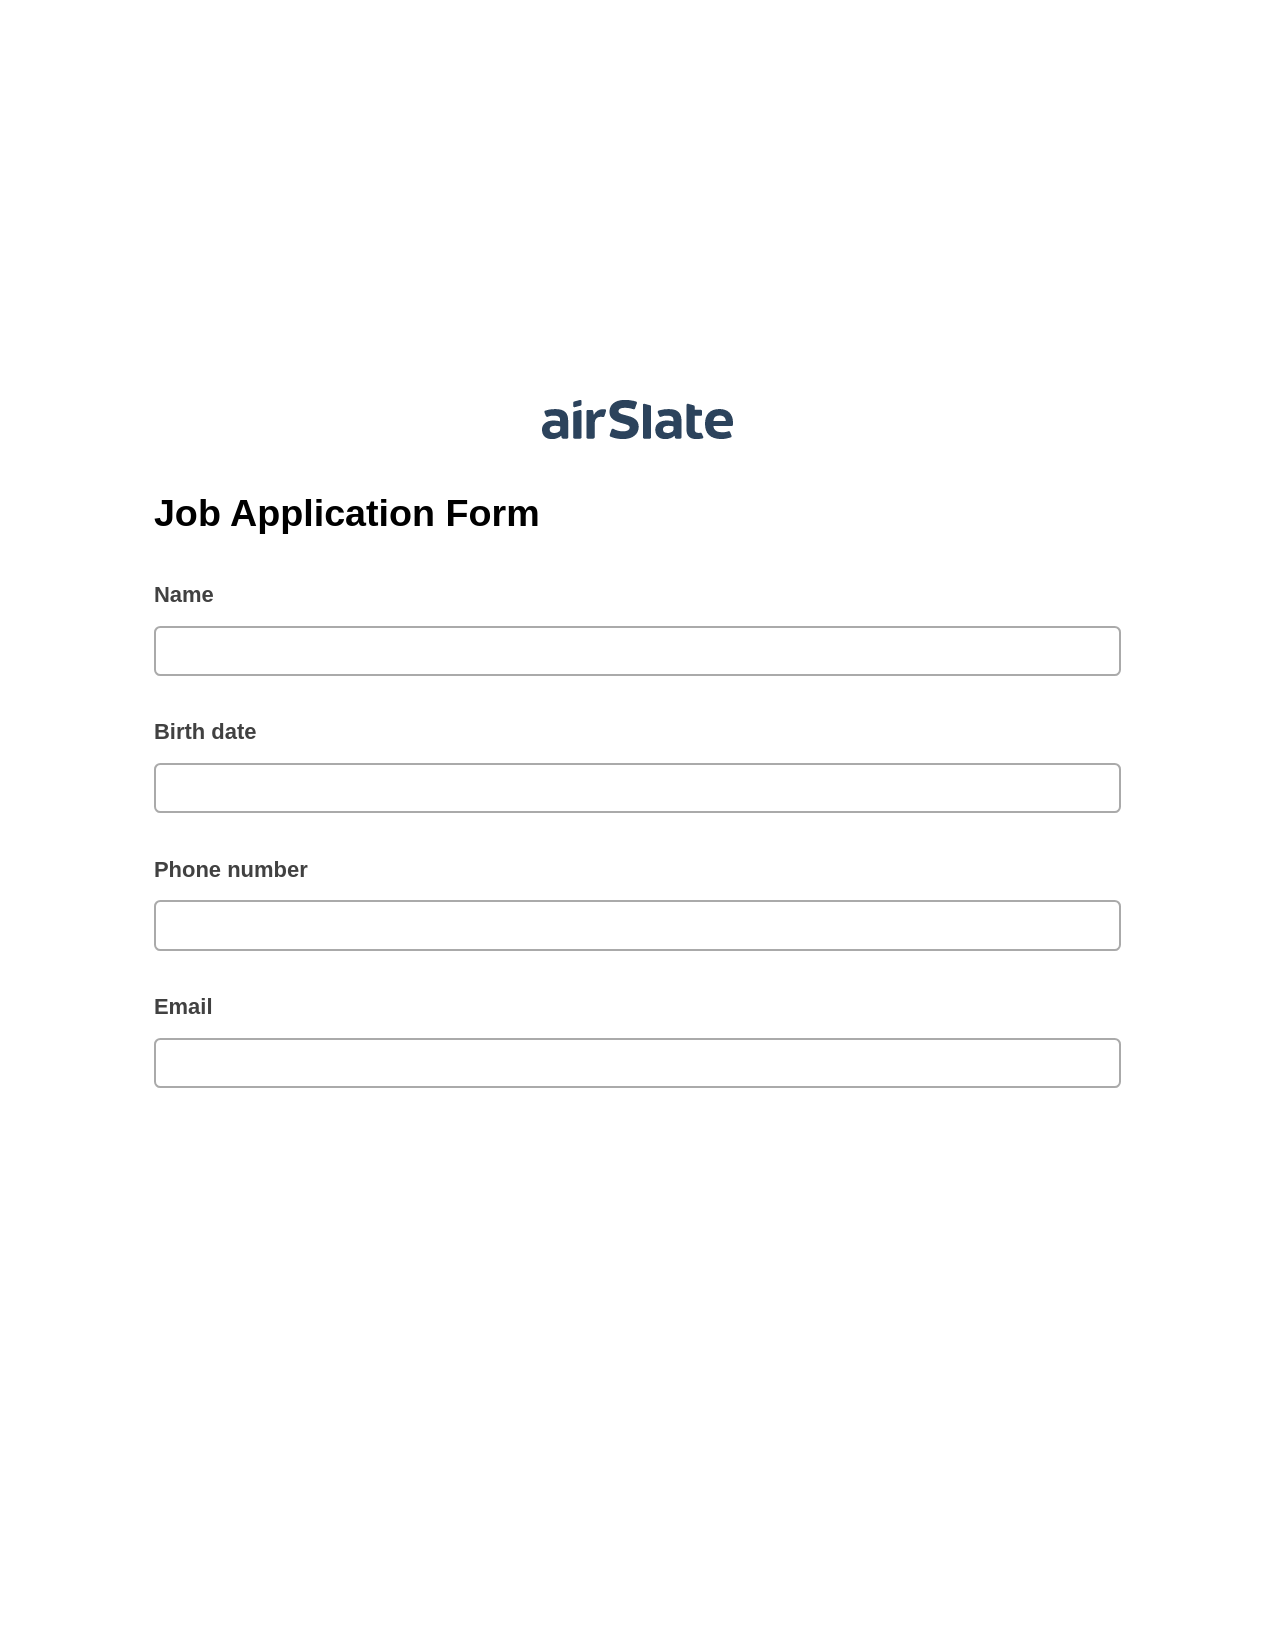 Multirole Job Application Form Pre-fill Slate from MS Dynamics 365 Records Bot, System Bot - Create a Slate in another Flow, Export to Formstack Documents Bot